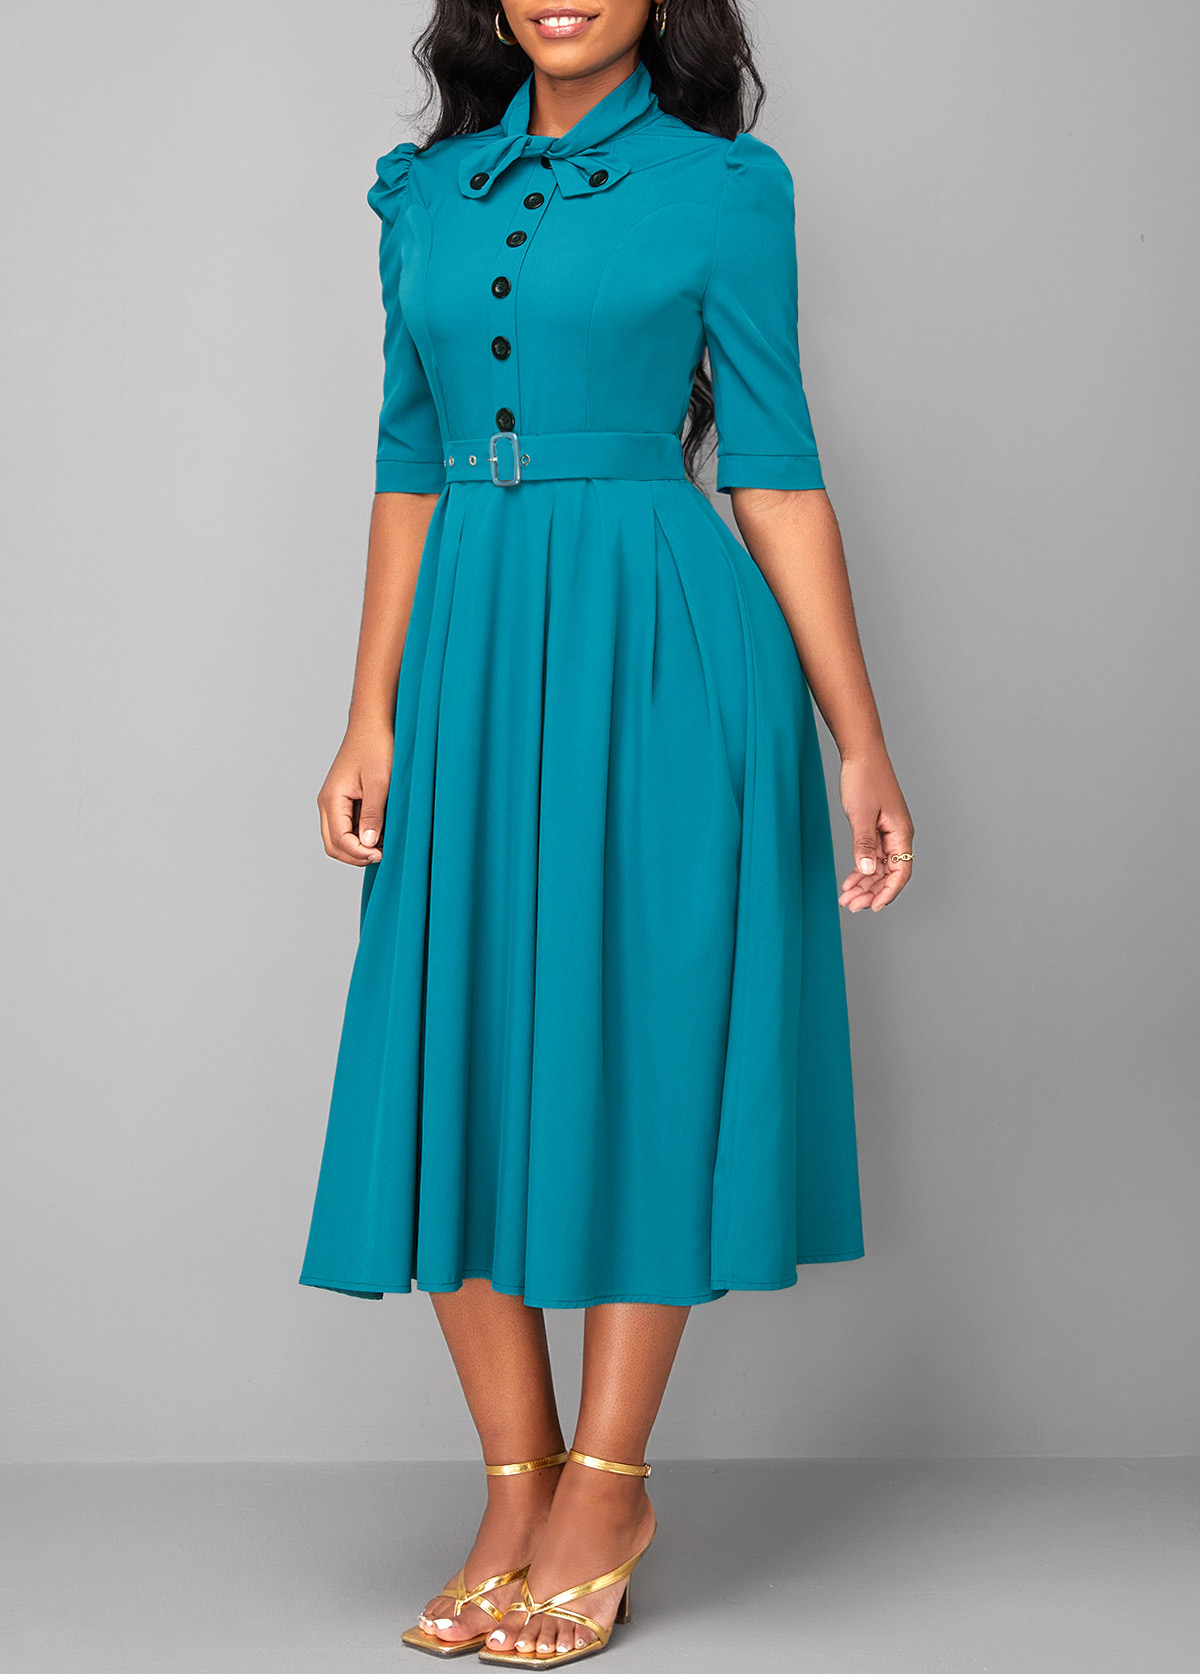 Turquoise Tie Belted Half Sleeve Dress